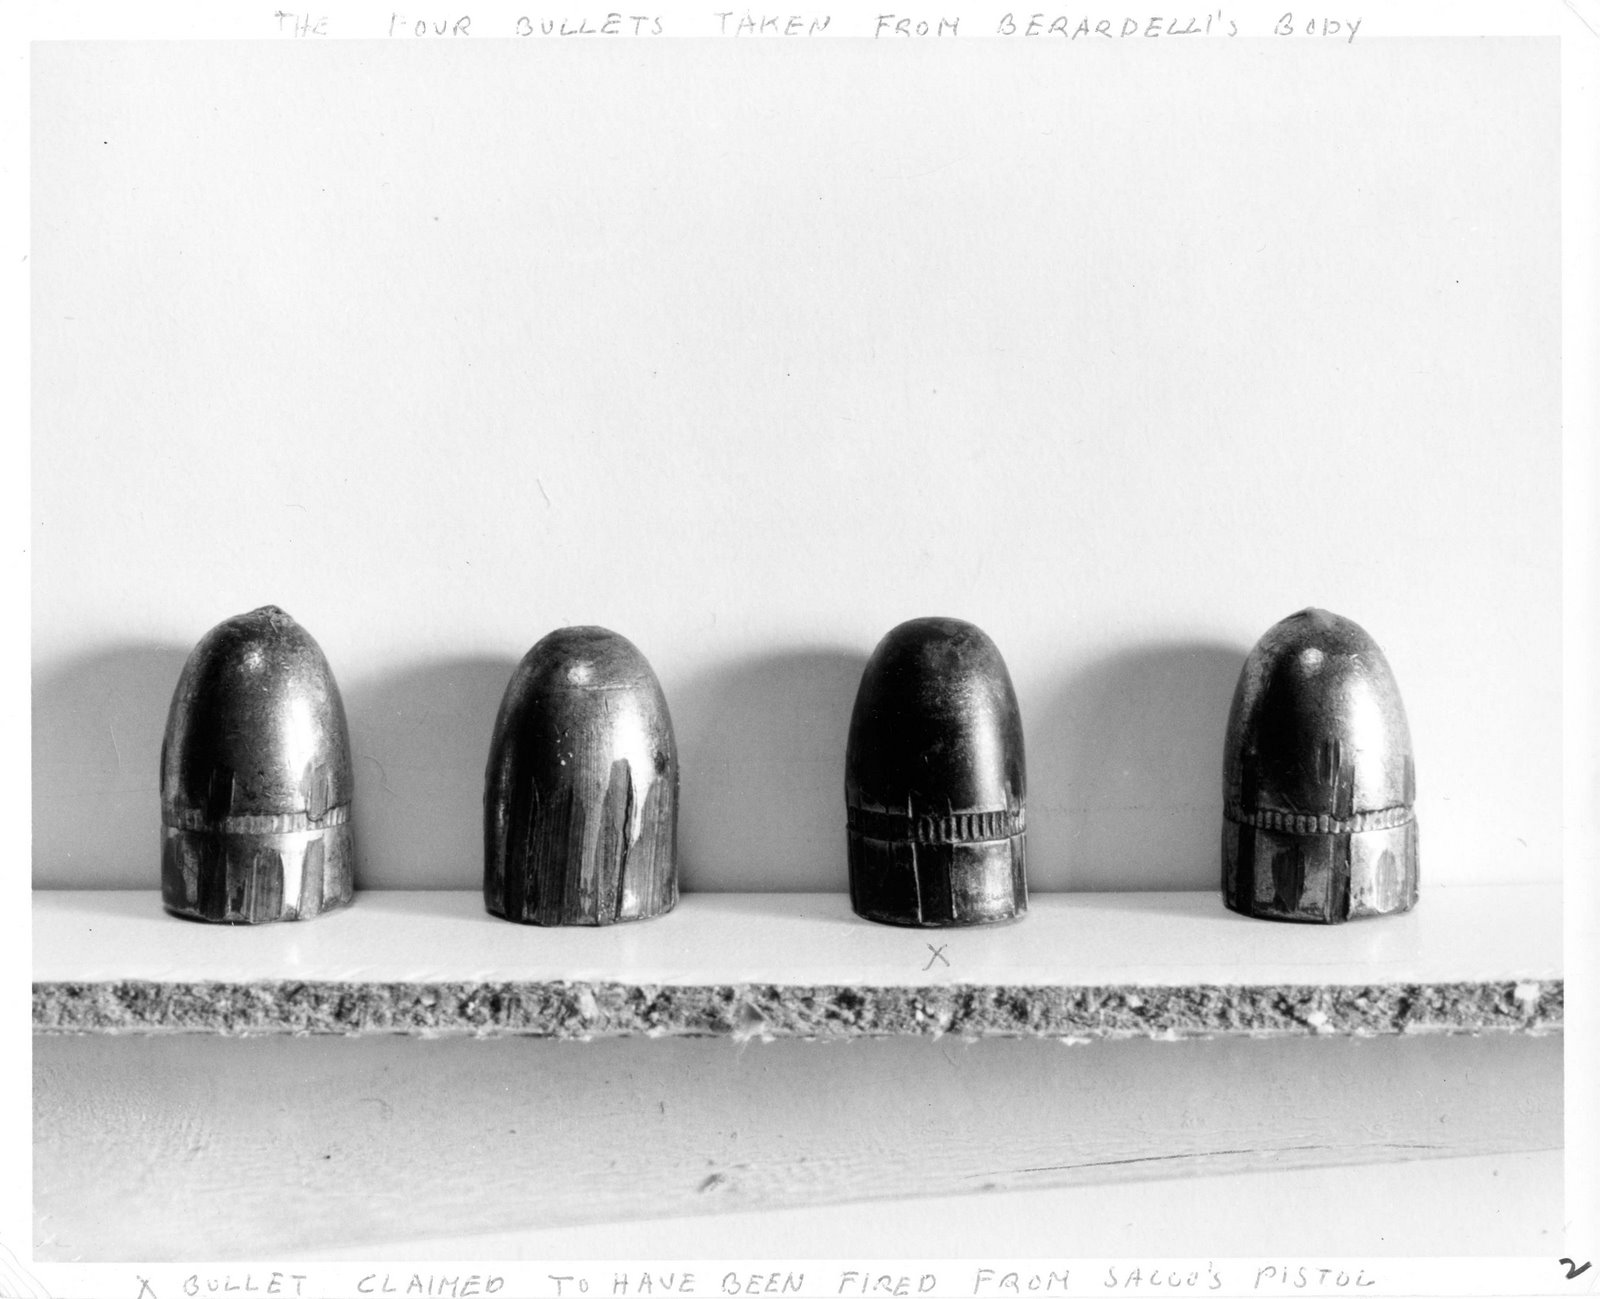 Black and white photograph of the four bullets taken from Berardelli's body